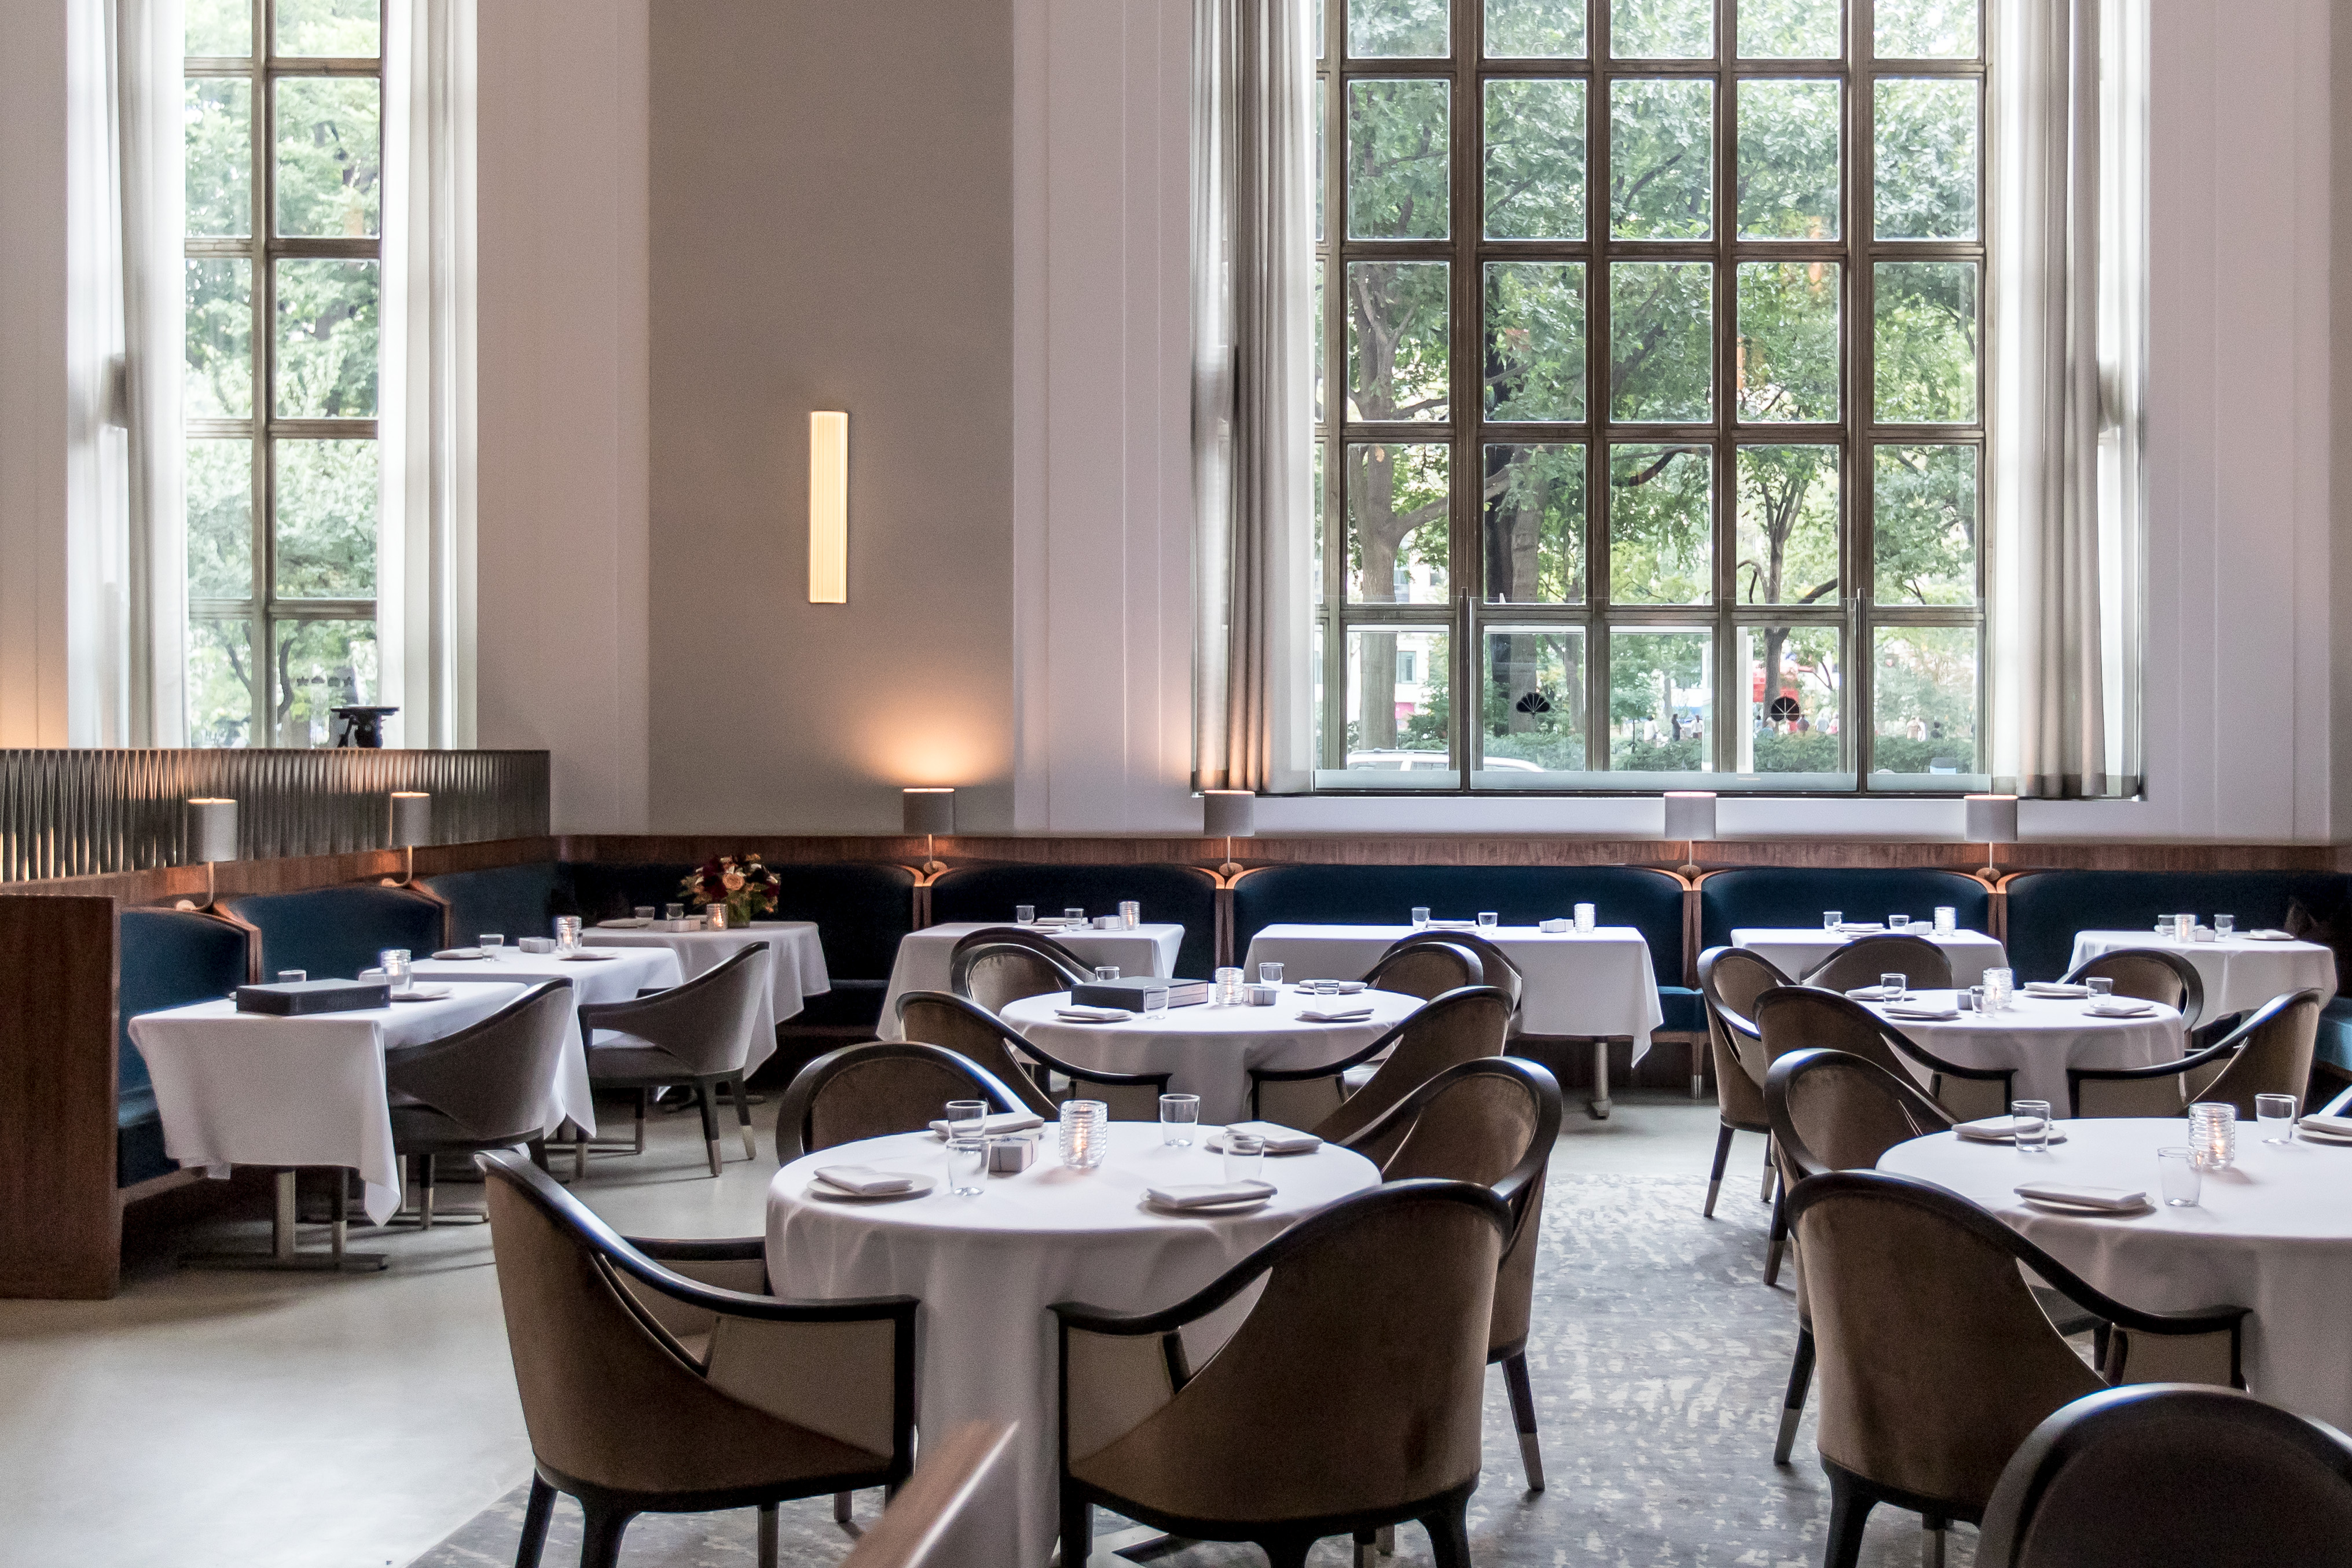 Natural light floods the dining room at Eleven Madison Park, which sits empty before service